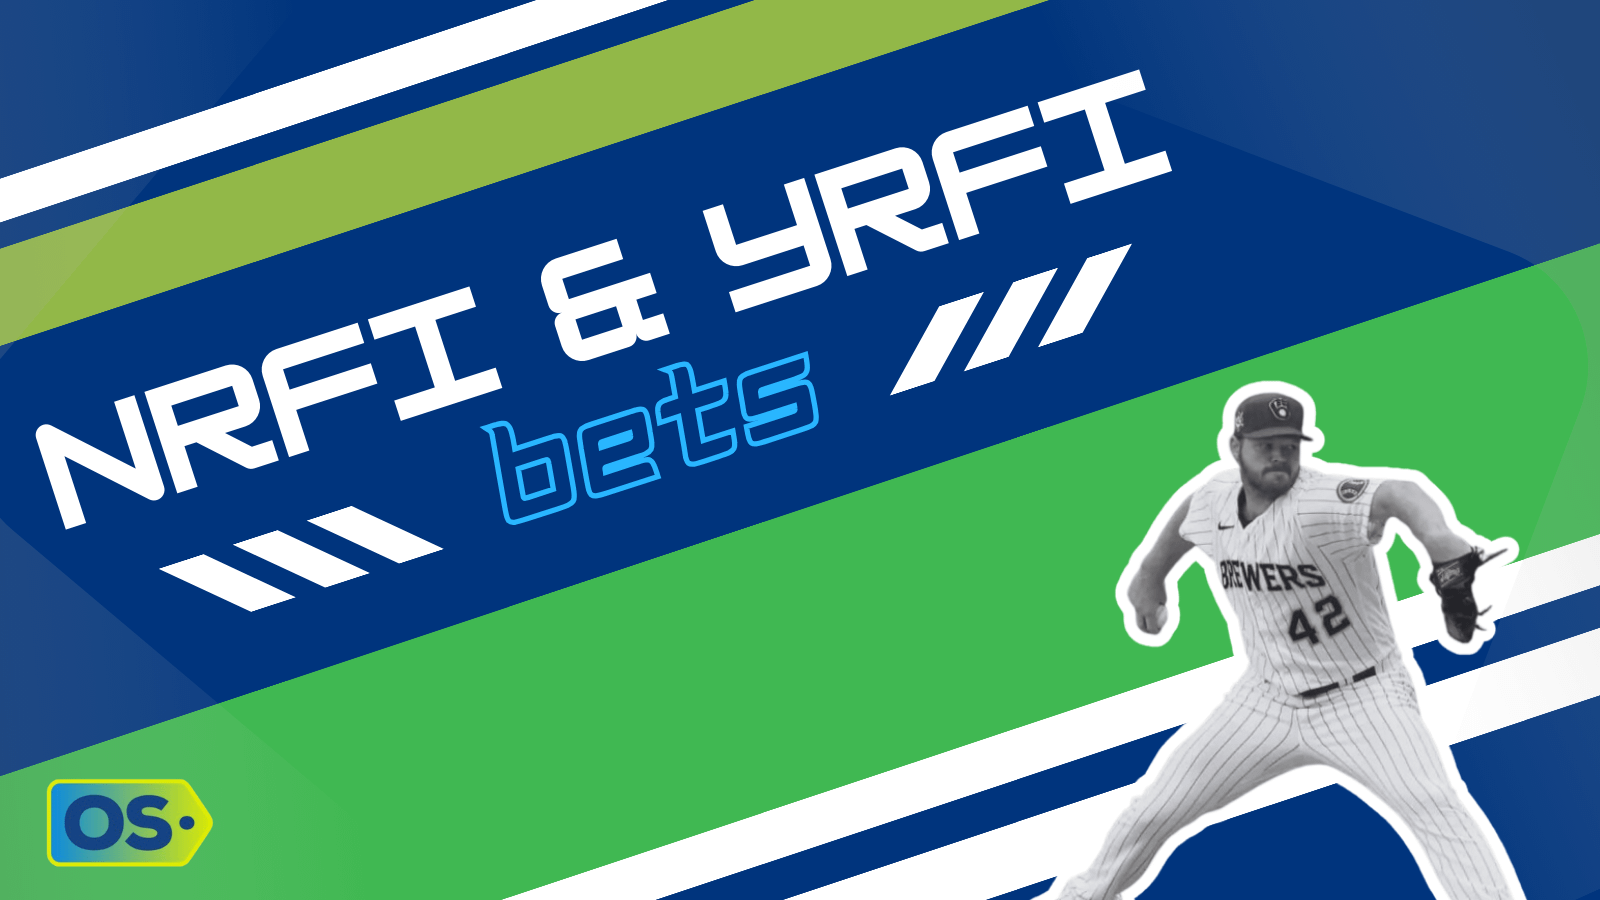 Best YRFI & NRFI Picks Today: 2 Bets Today for Back to Back Parlay Wins! (September 11)